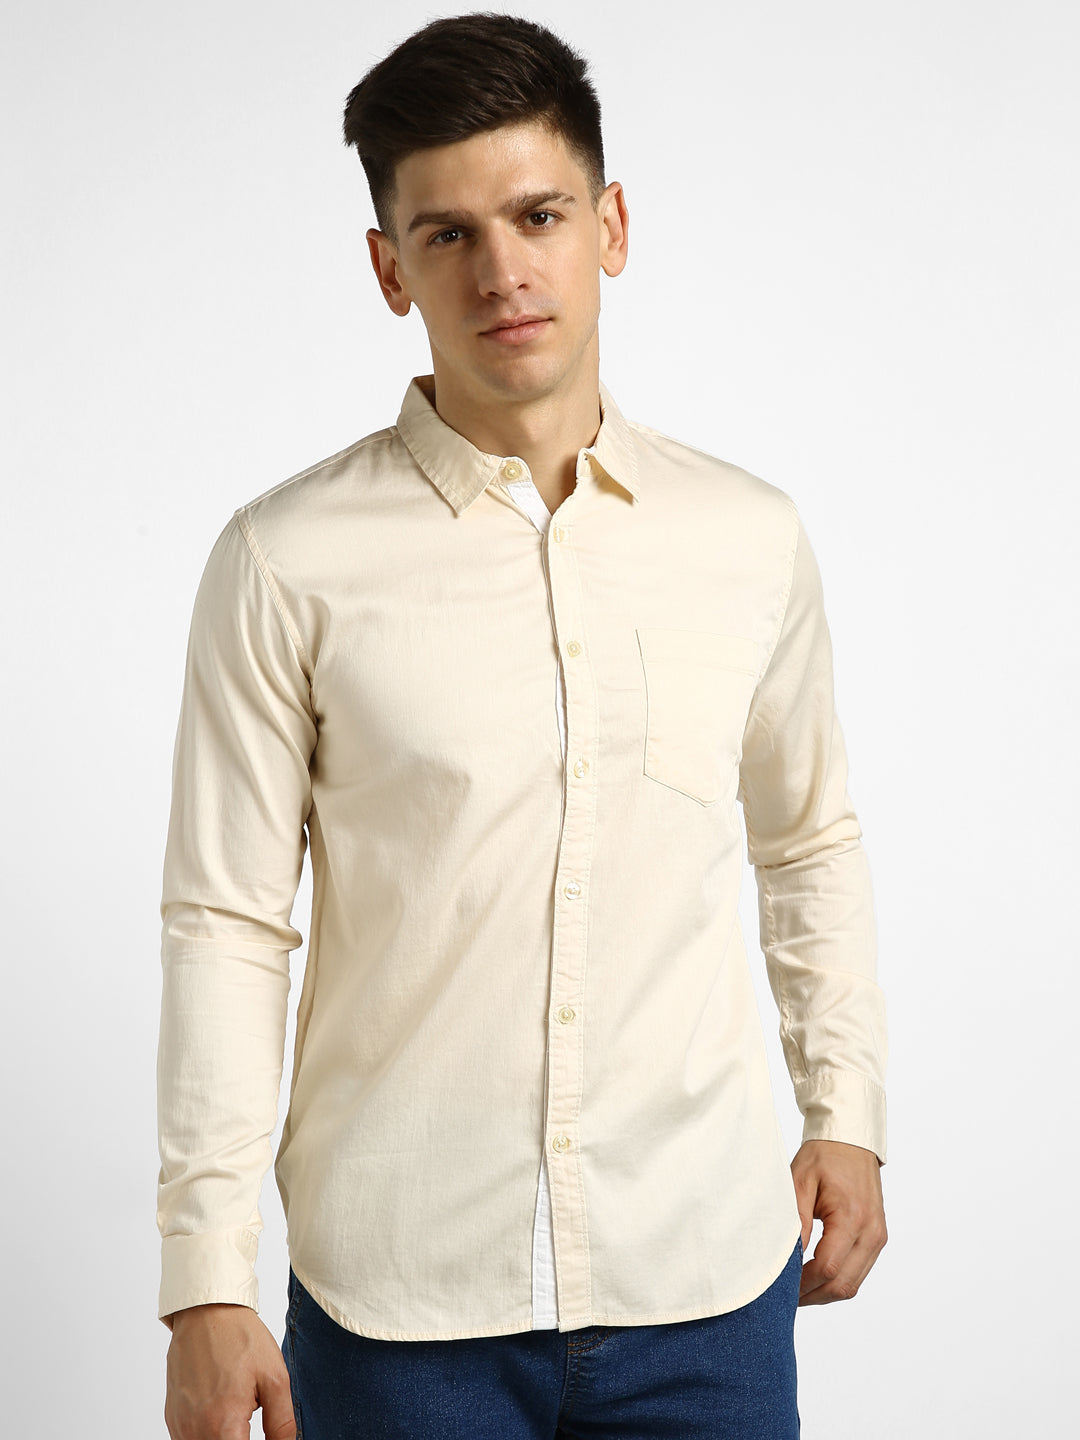 Men's Beige Cotton Full Sleeve Slim Fit Casual Solid Shirt